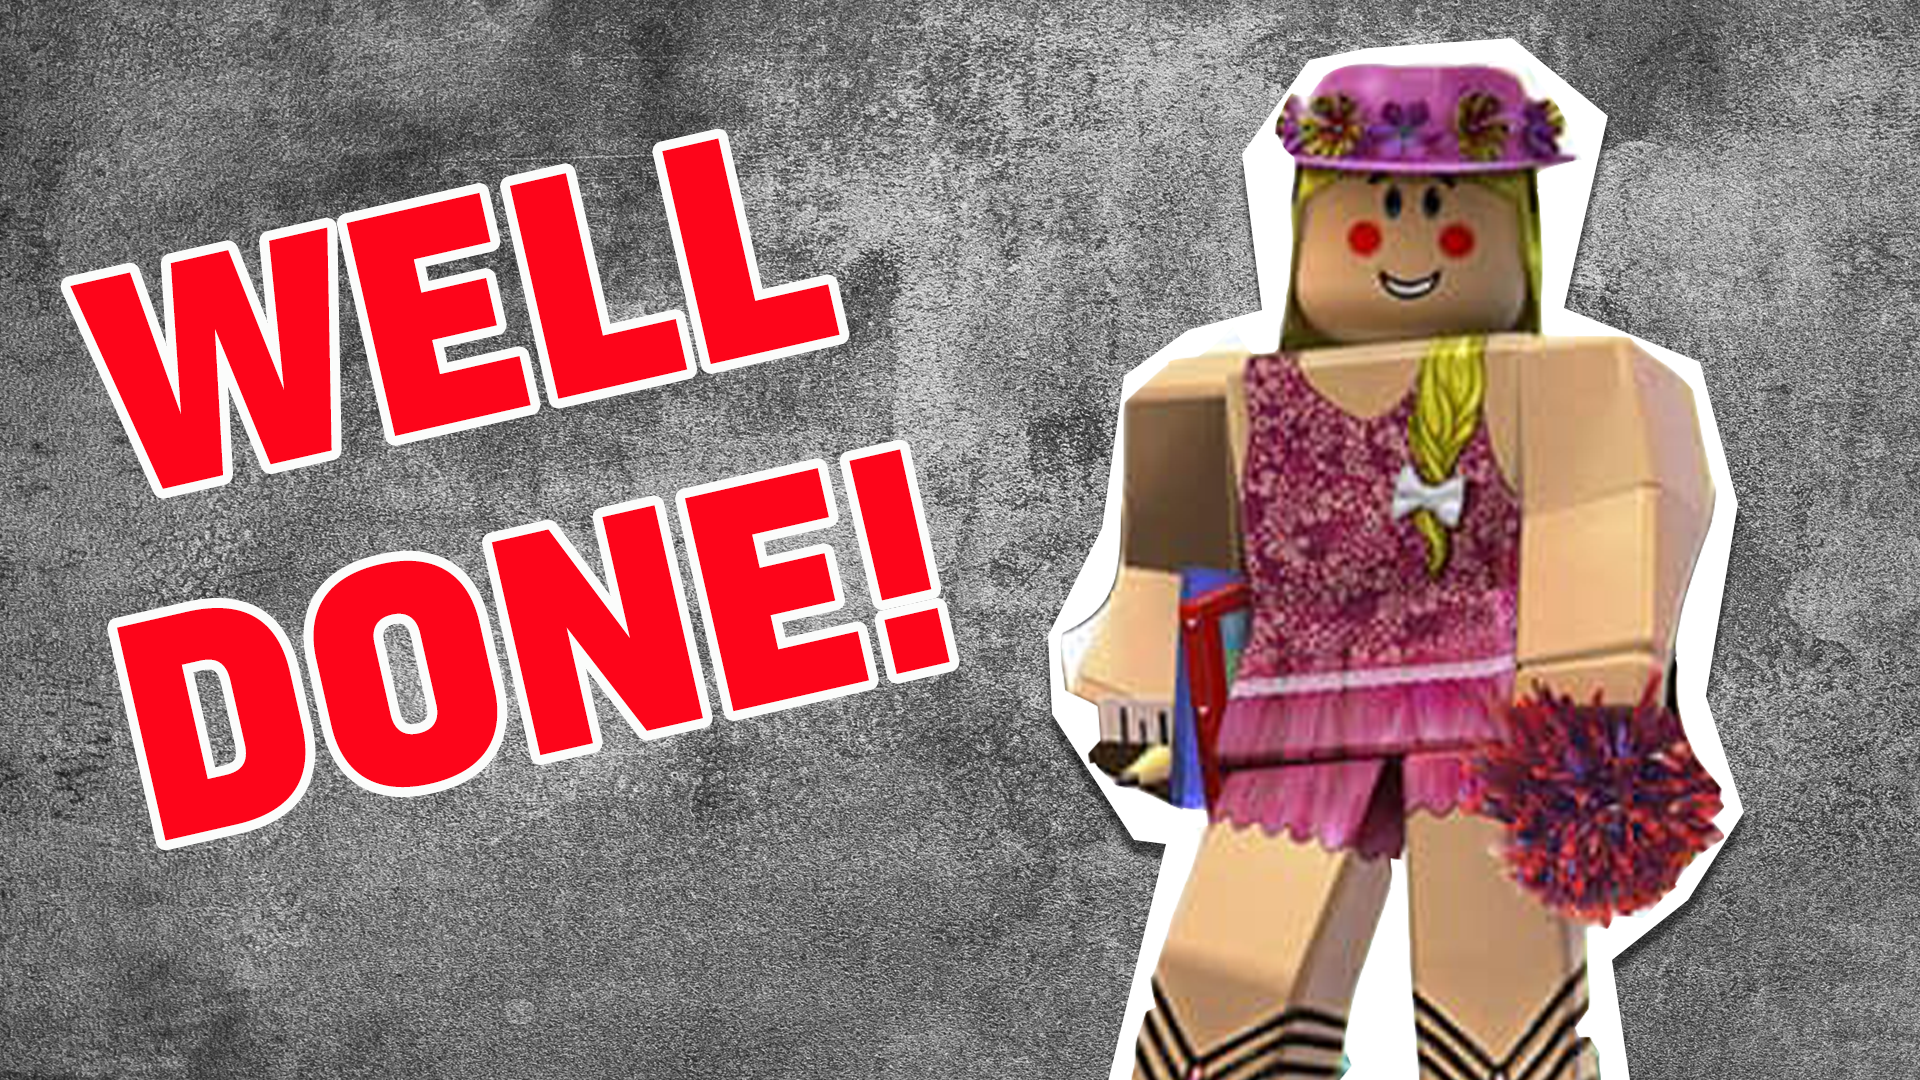 Well done! We know a Roblox head when we see one! But can you get 100% next time? Let's find out!